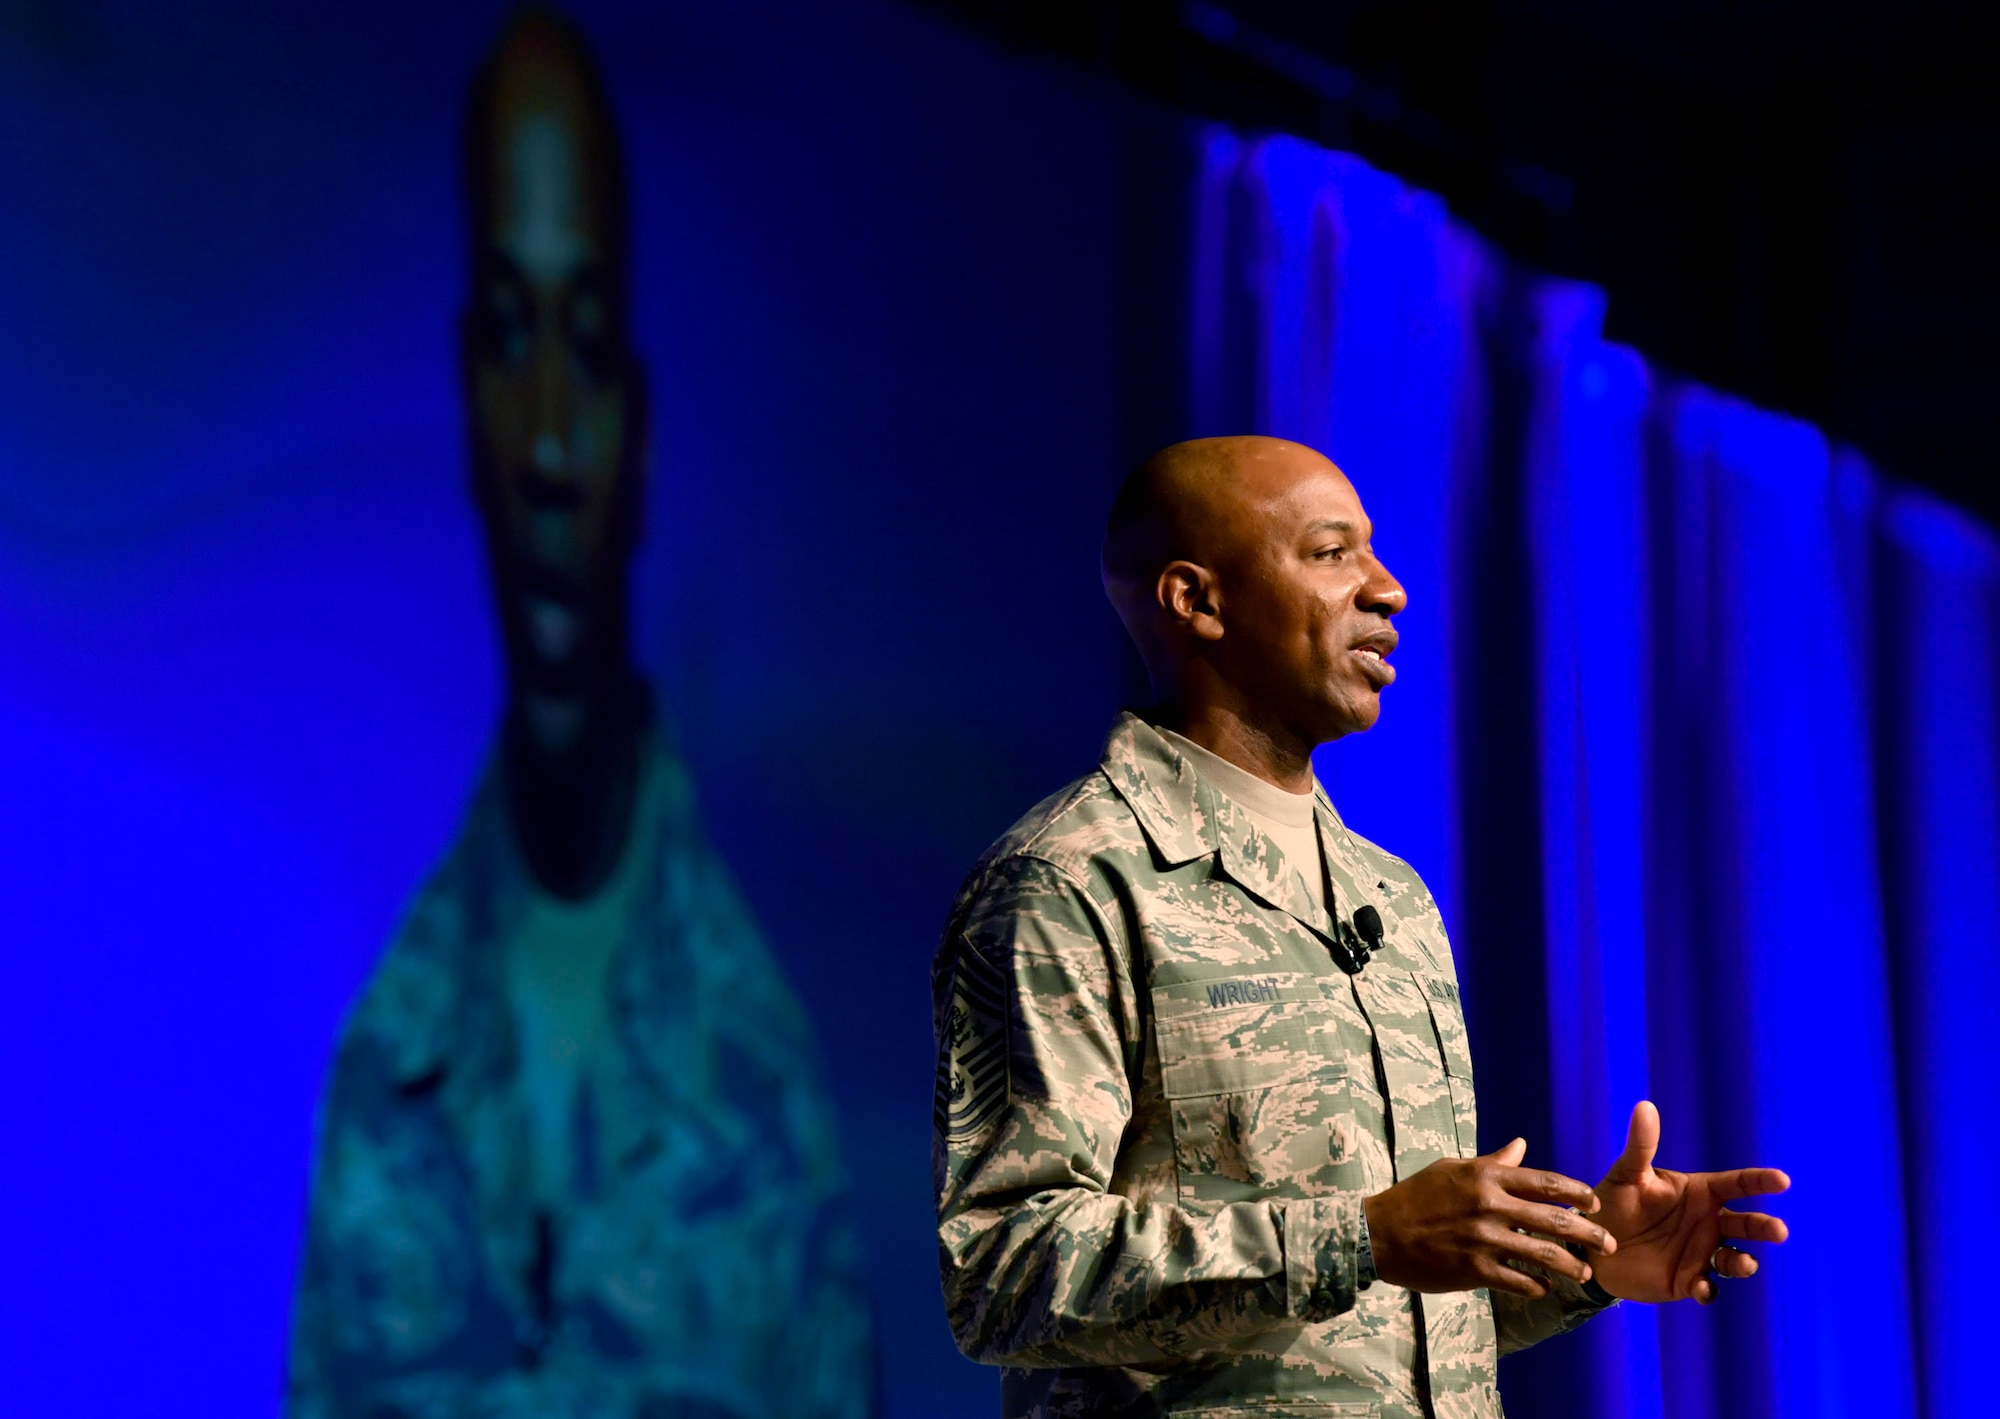 Chief Master Sgt. of the Air Force Kaleth O. Wright speaks about harnessing the innovative spirit of Airmen during the Air Force Association Air Warfare Symposium in Orlando, Fla., Feb. 22, 2018. (U.S. Air Force photo by Wayne A. Clark)